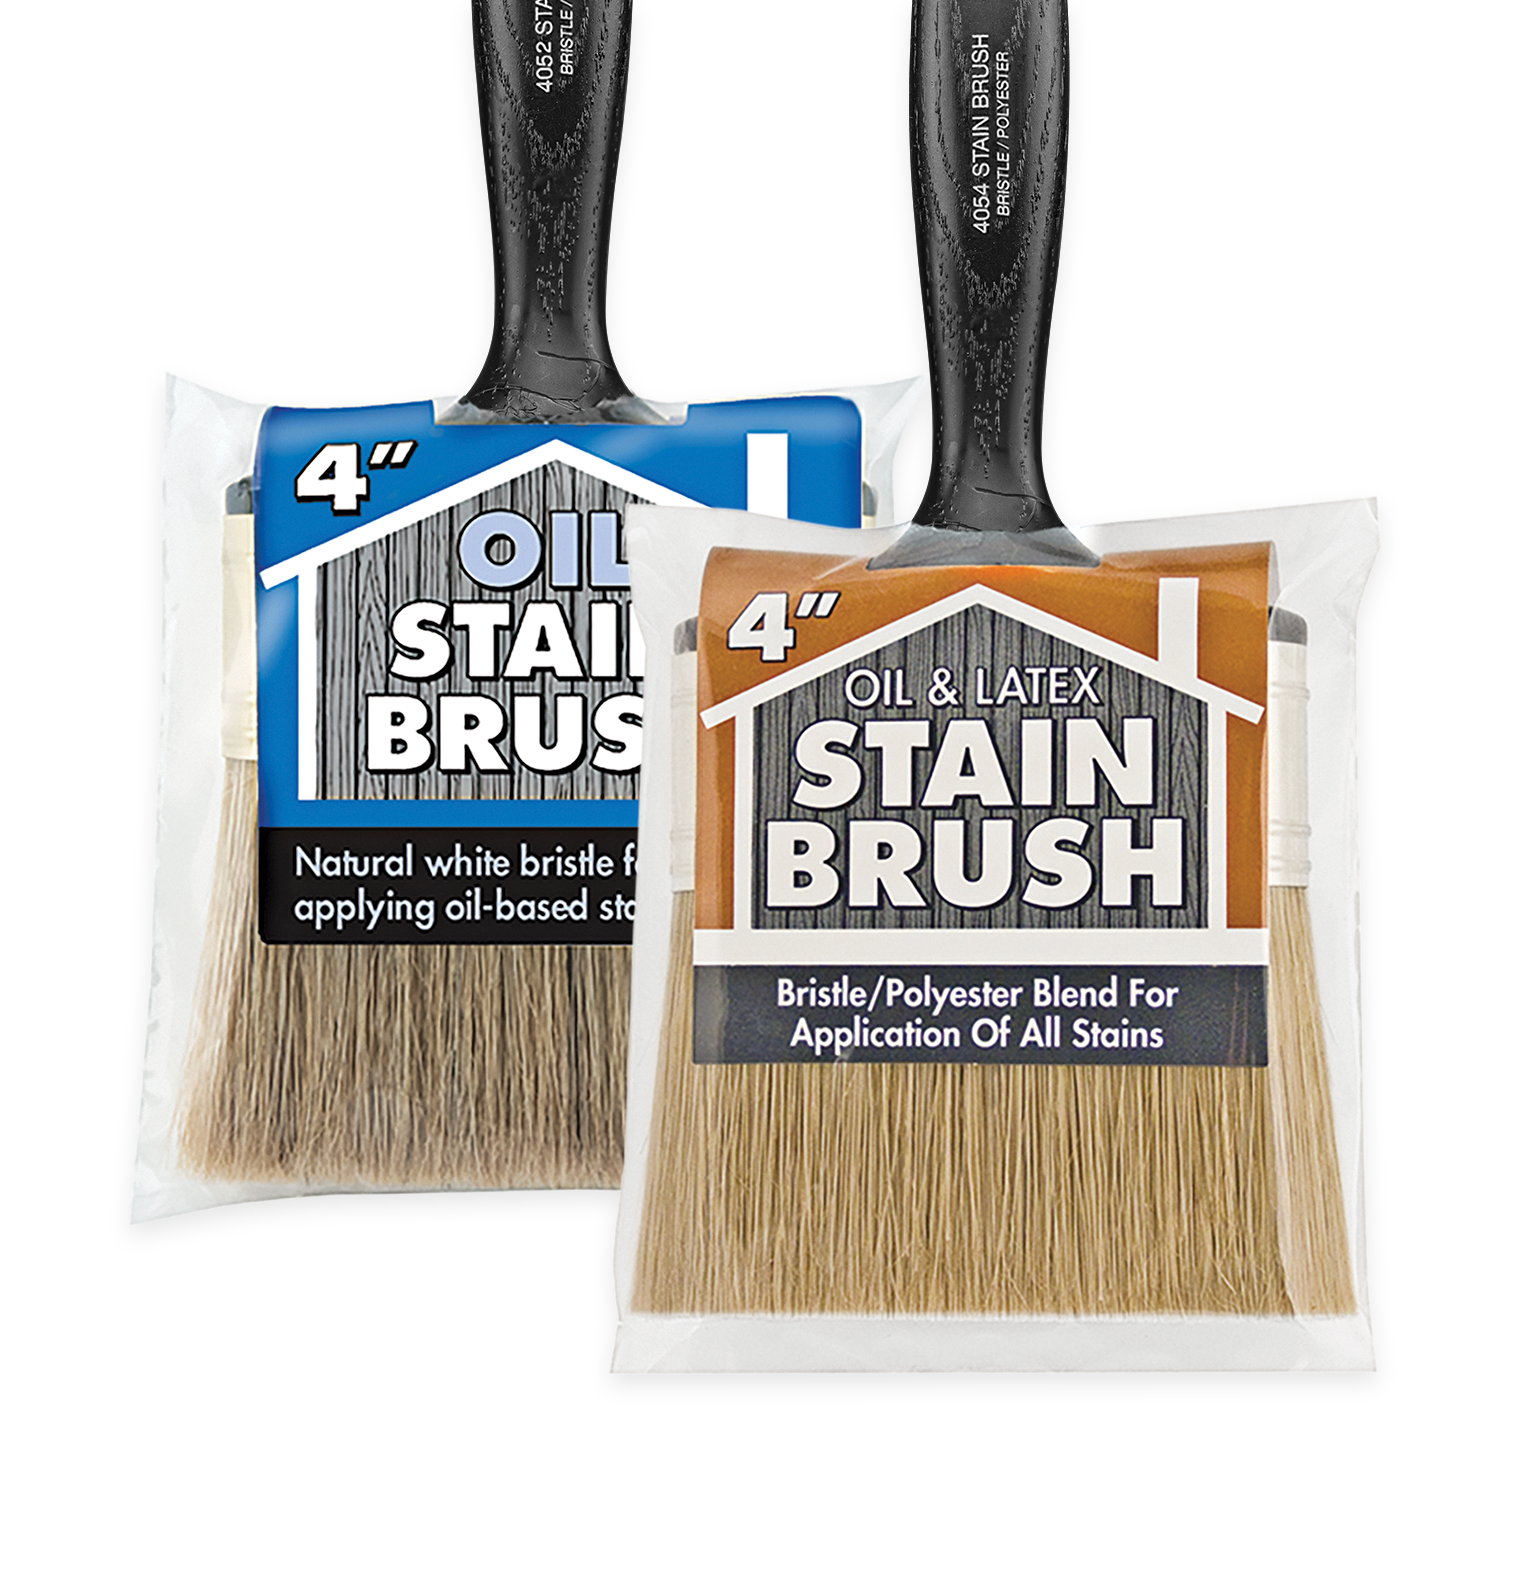 Wooster Brush Available F5119-4 Bravo Stainer Bristle/Polyester Stain  Brush, 4 Inch, 4-Inch , White